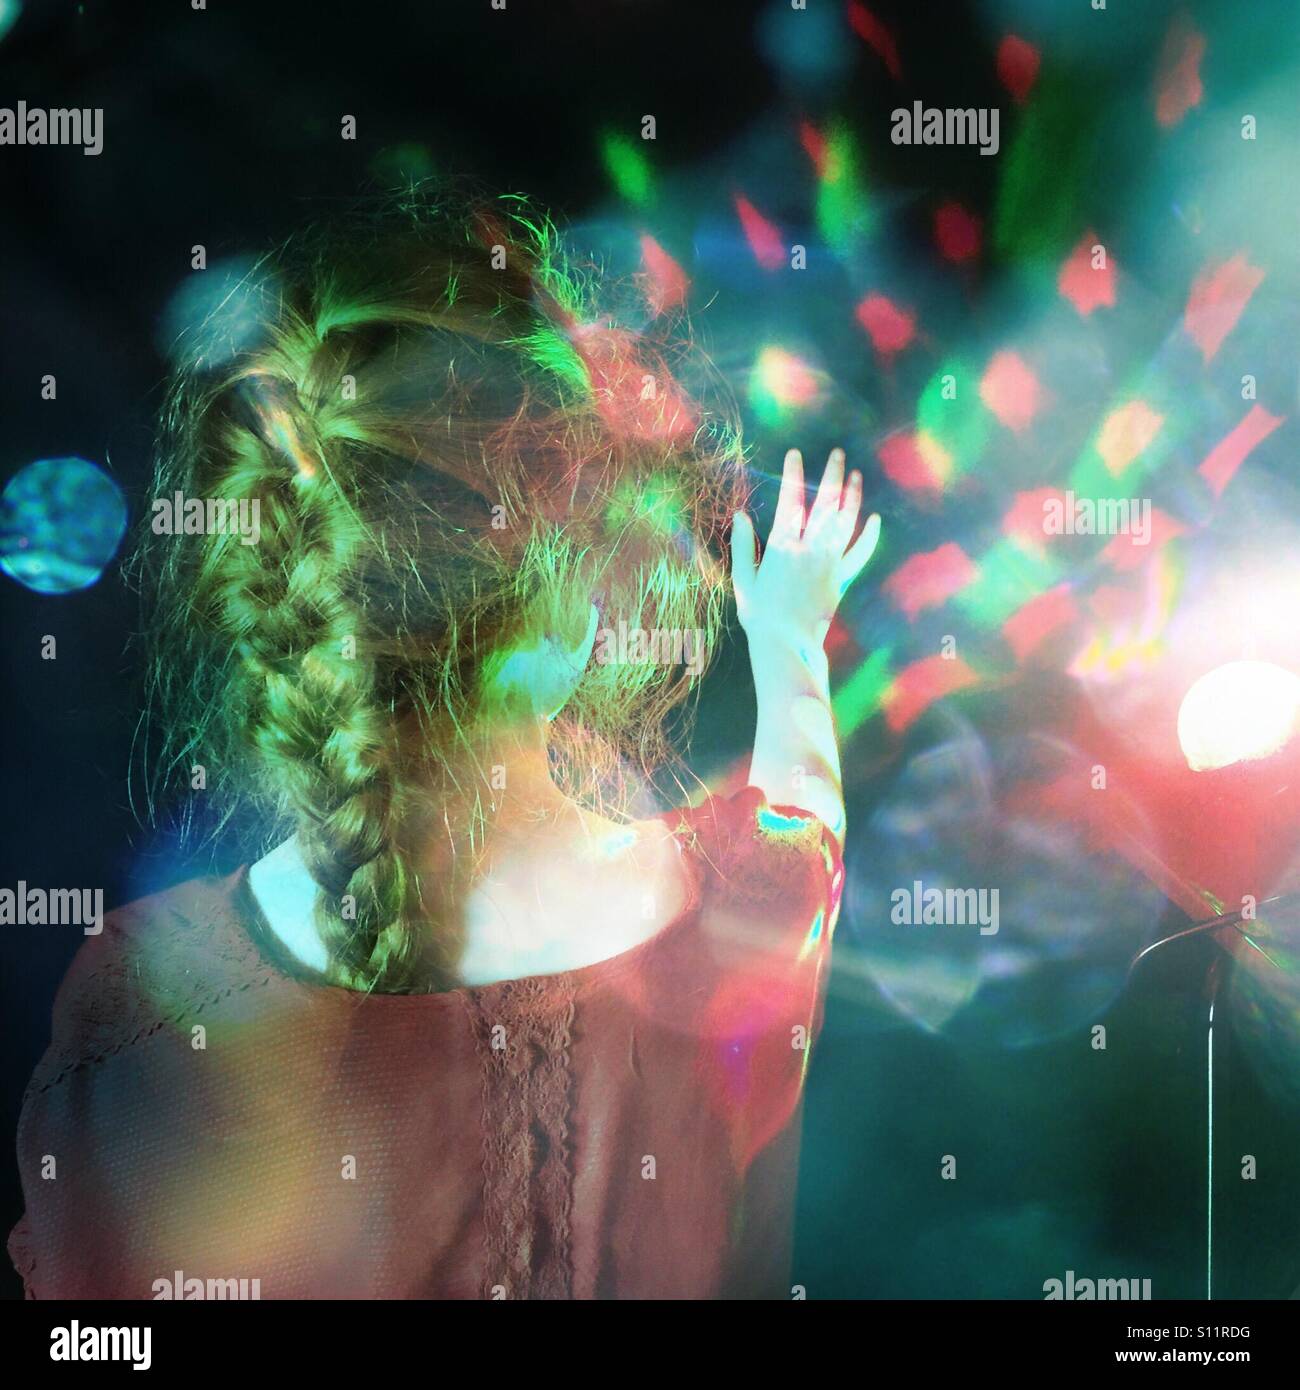 Young girl reaches out to coloured lights Stock Photo